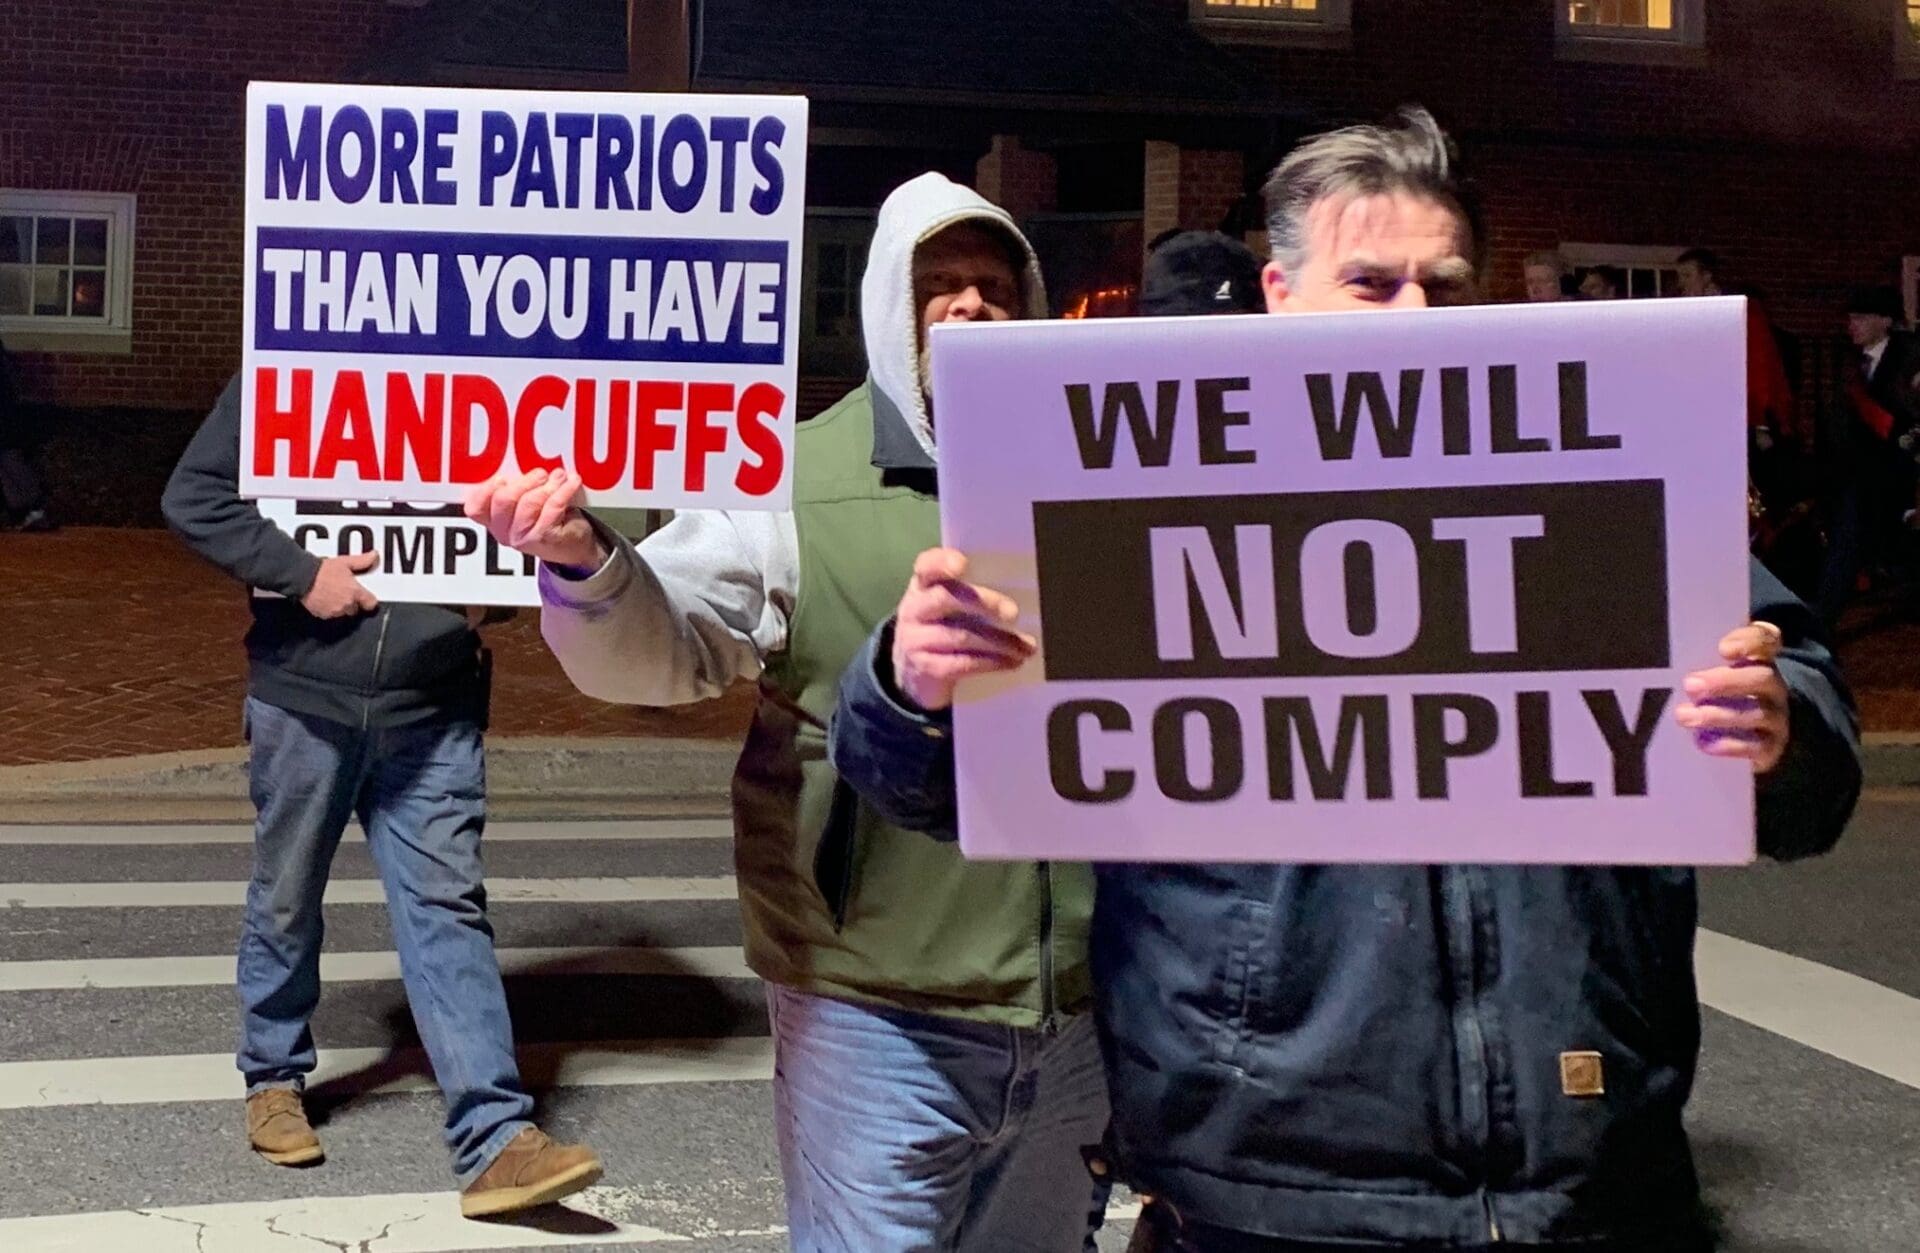 will not comply handcuffs